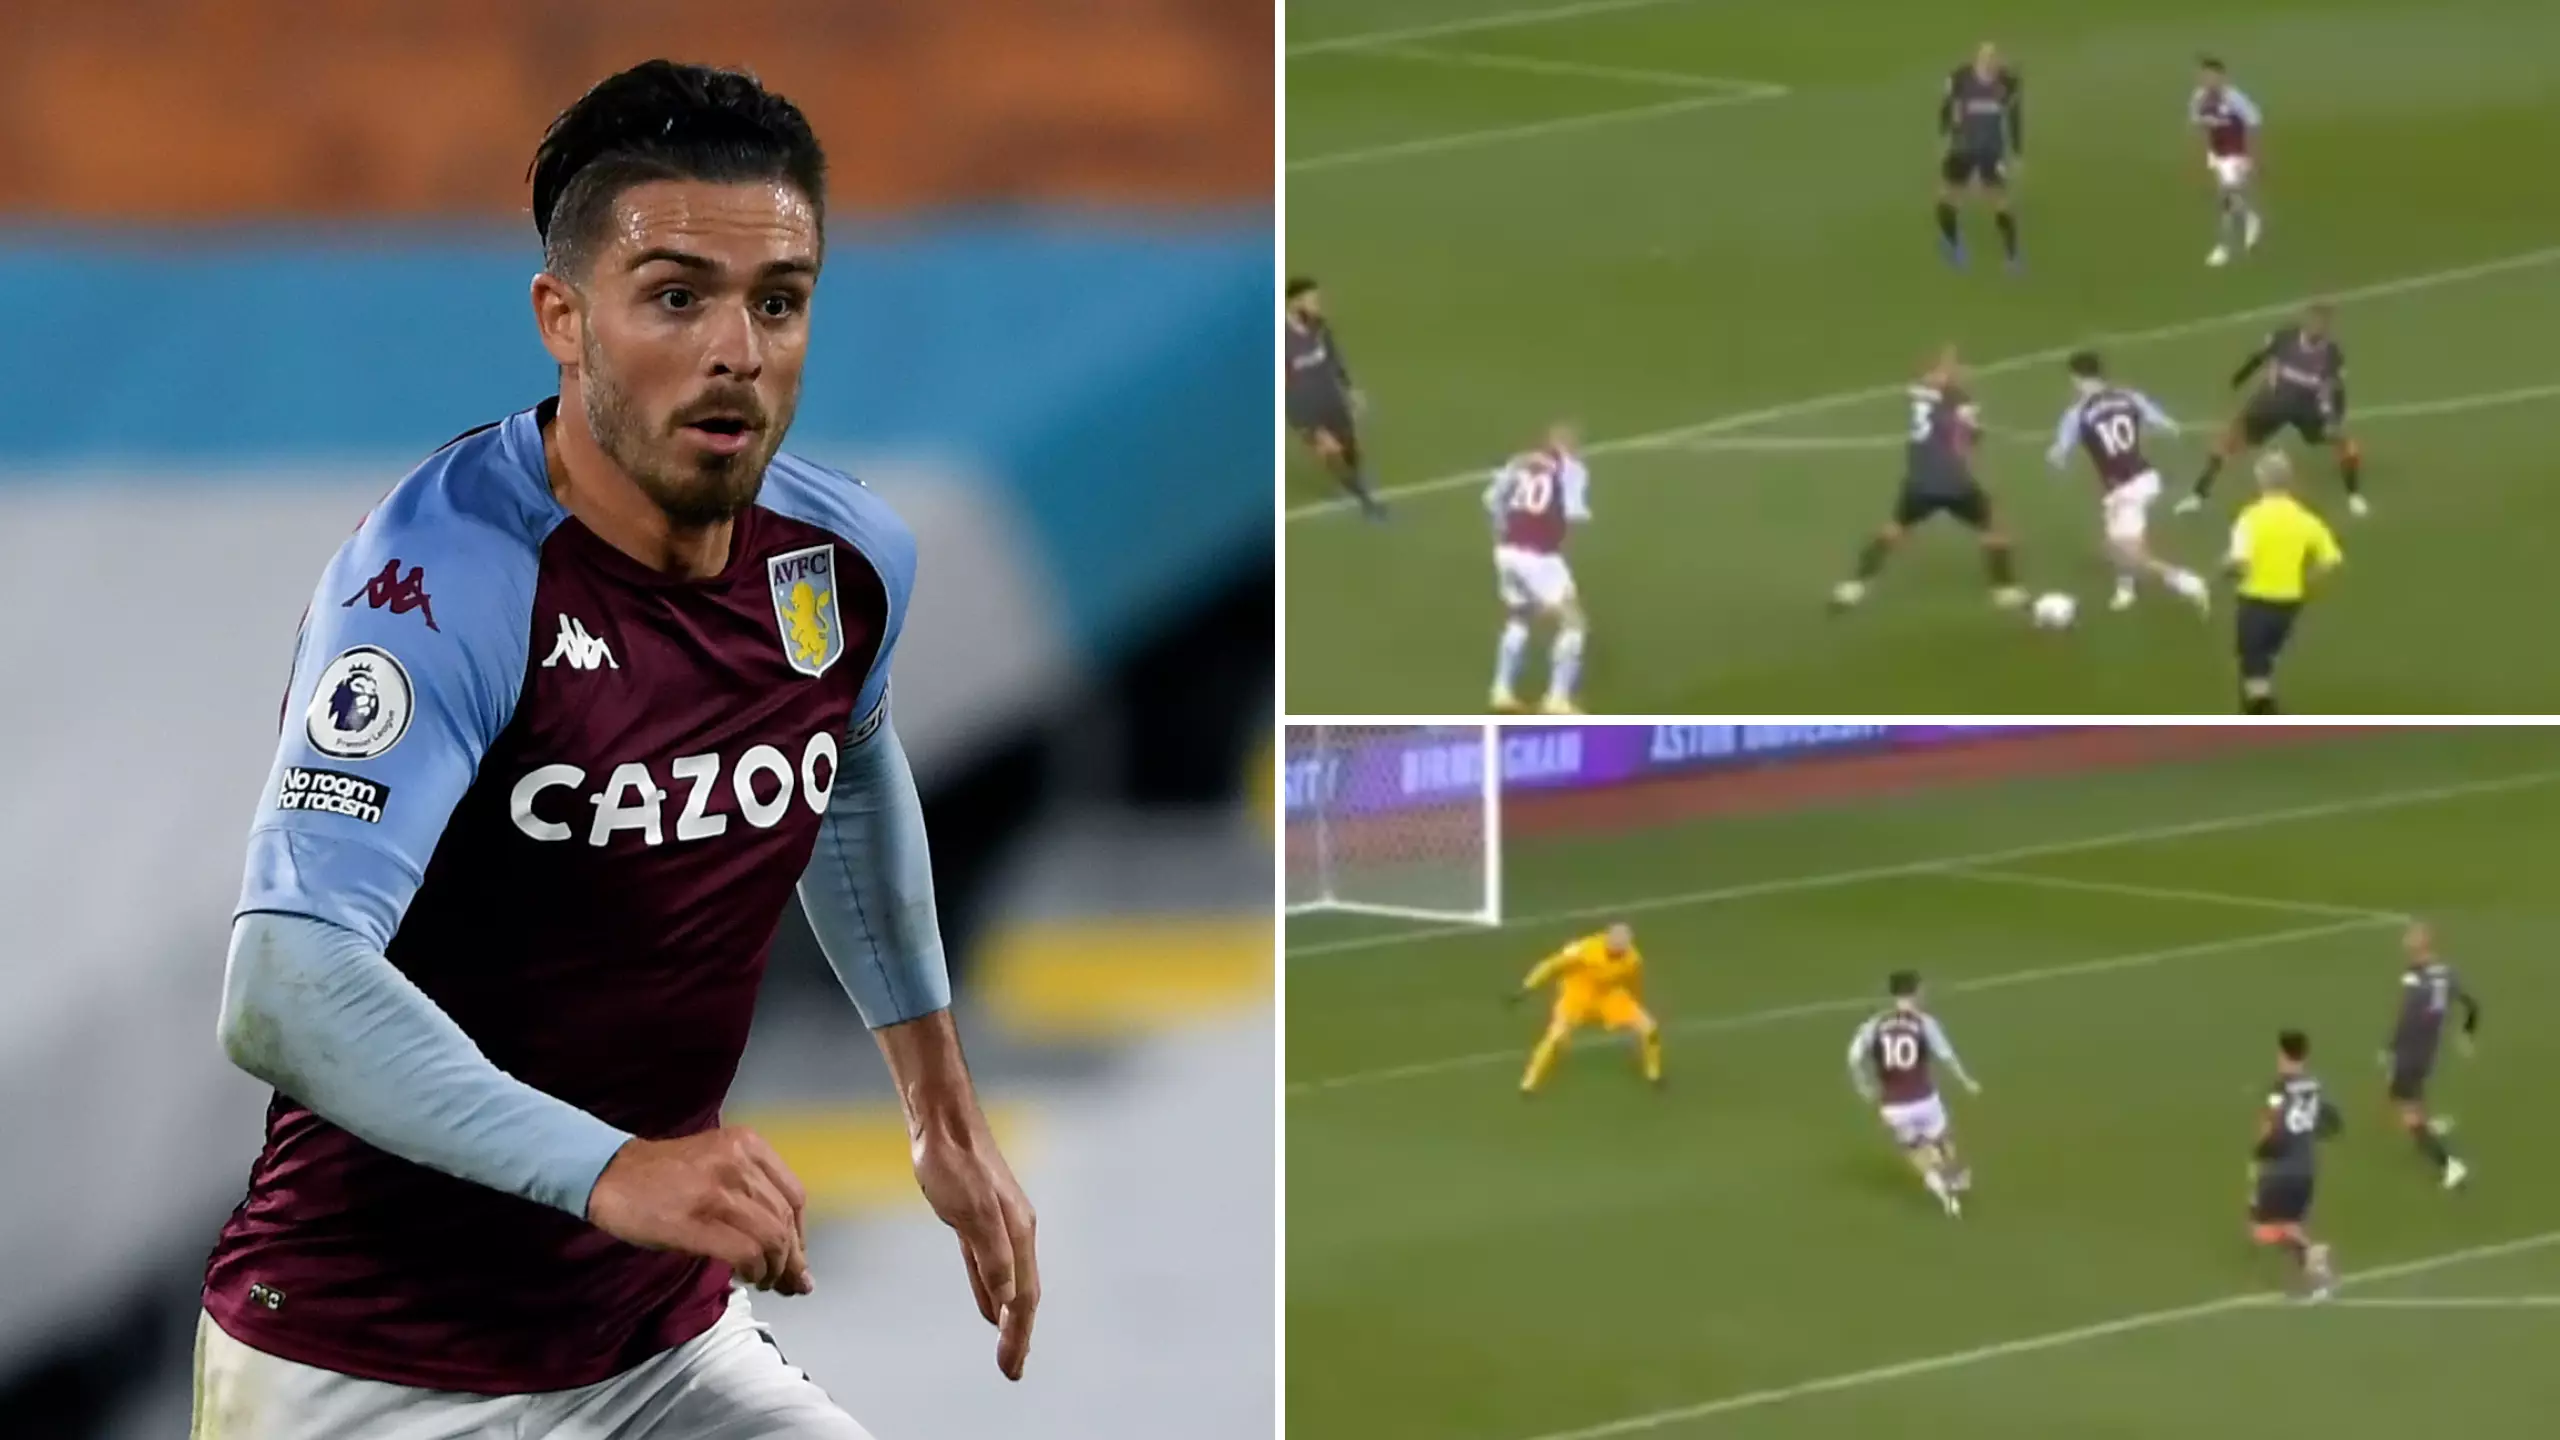 Jack Grealish Produced An Attacking Masterclass In Aston Villa's Historic 7-2 Win Over Liverpool